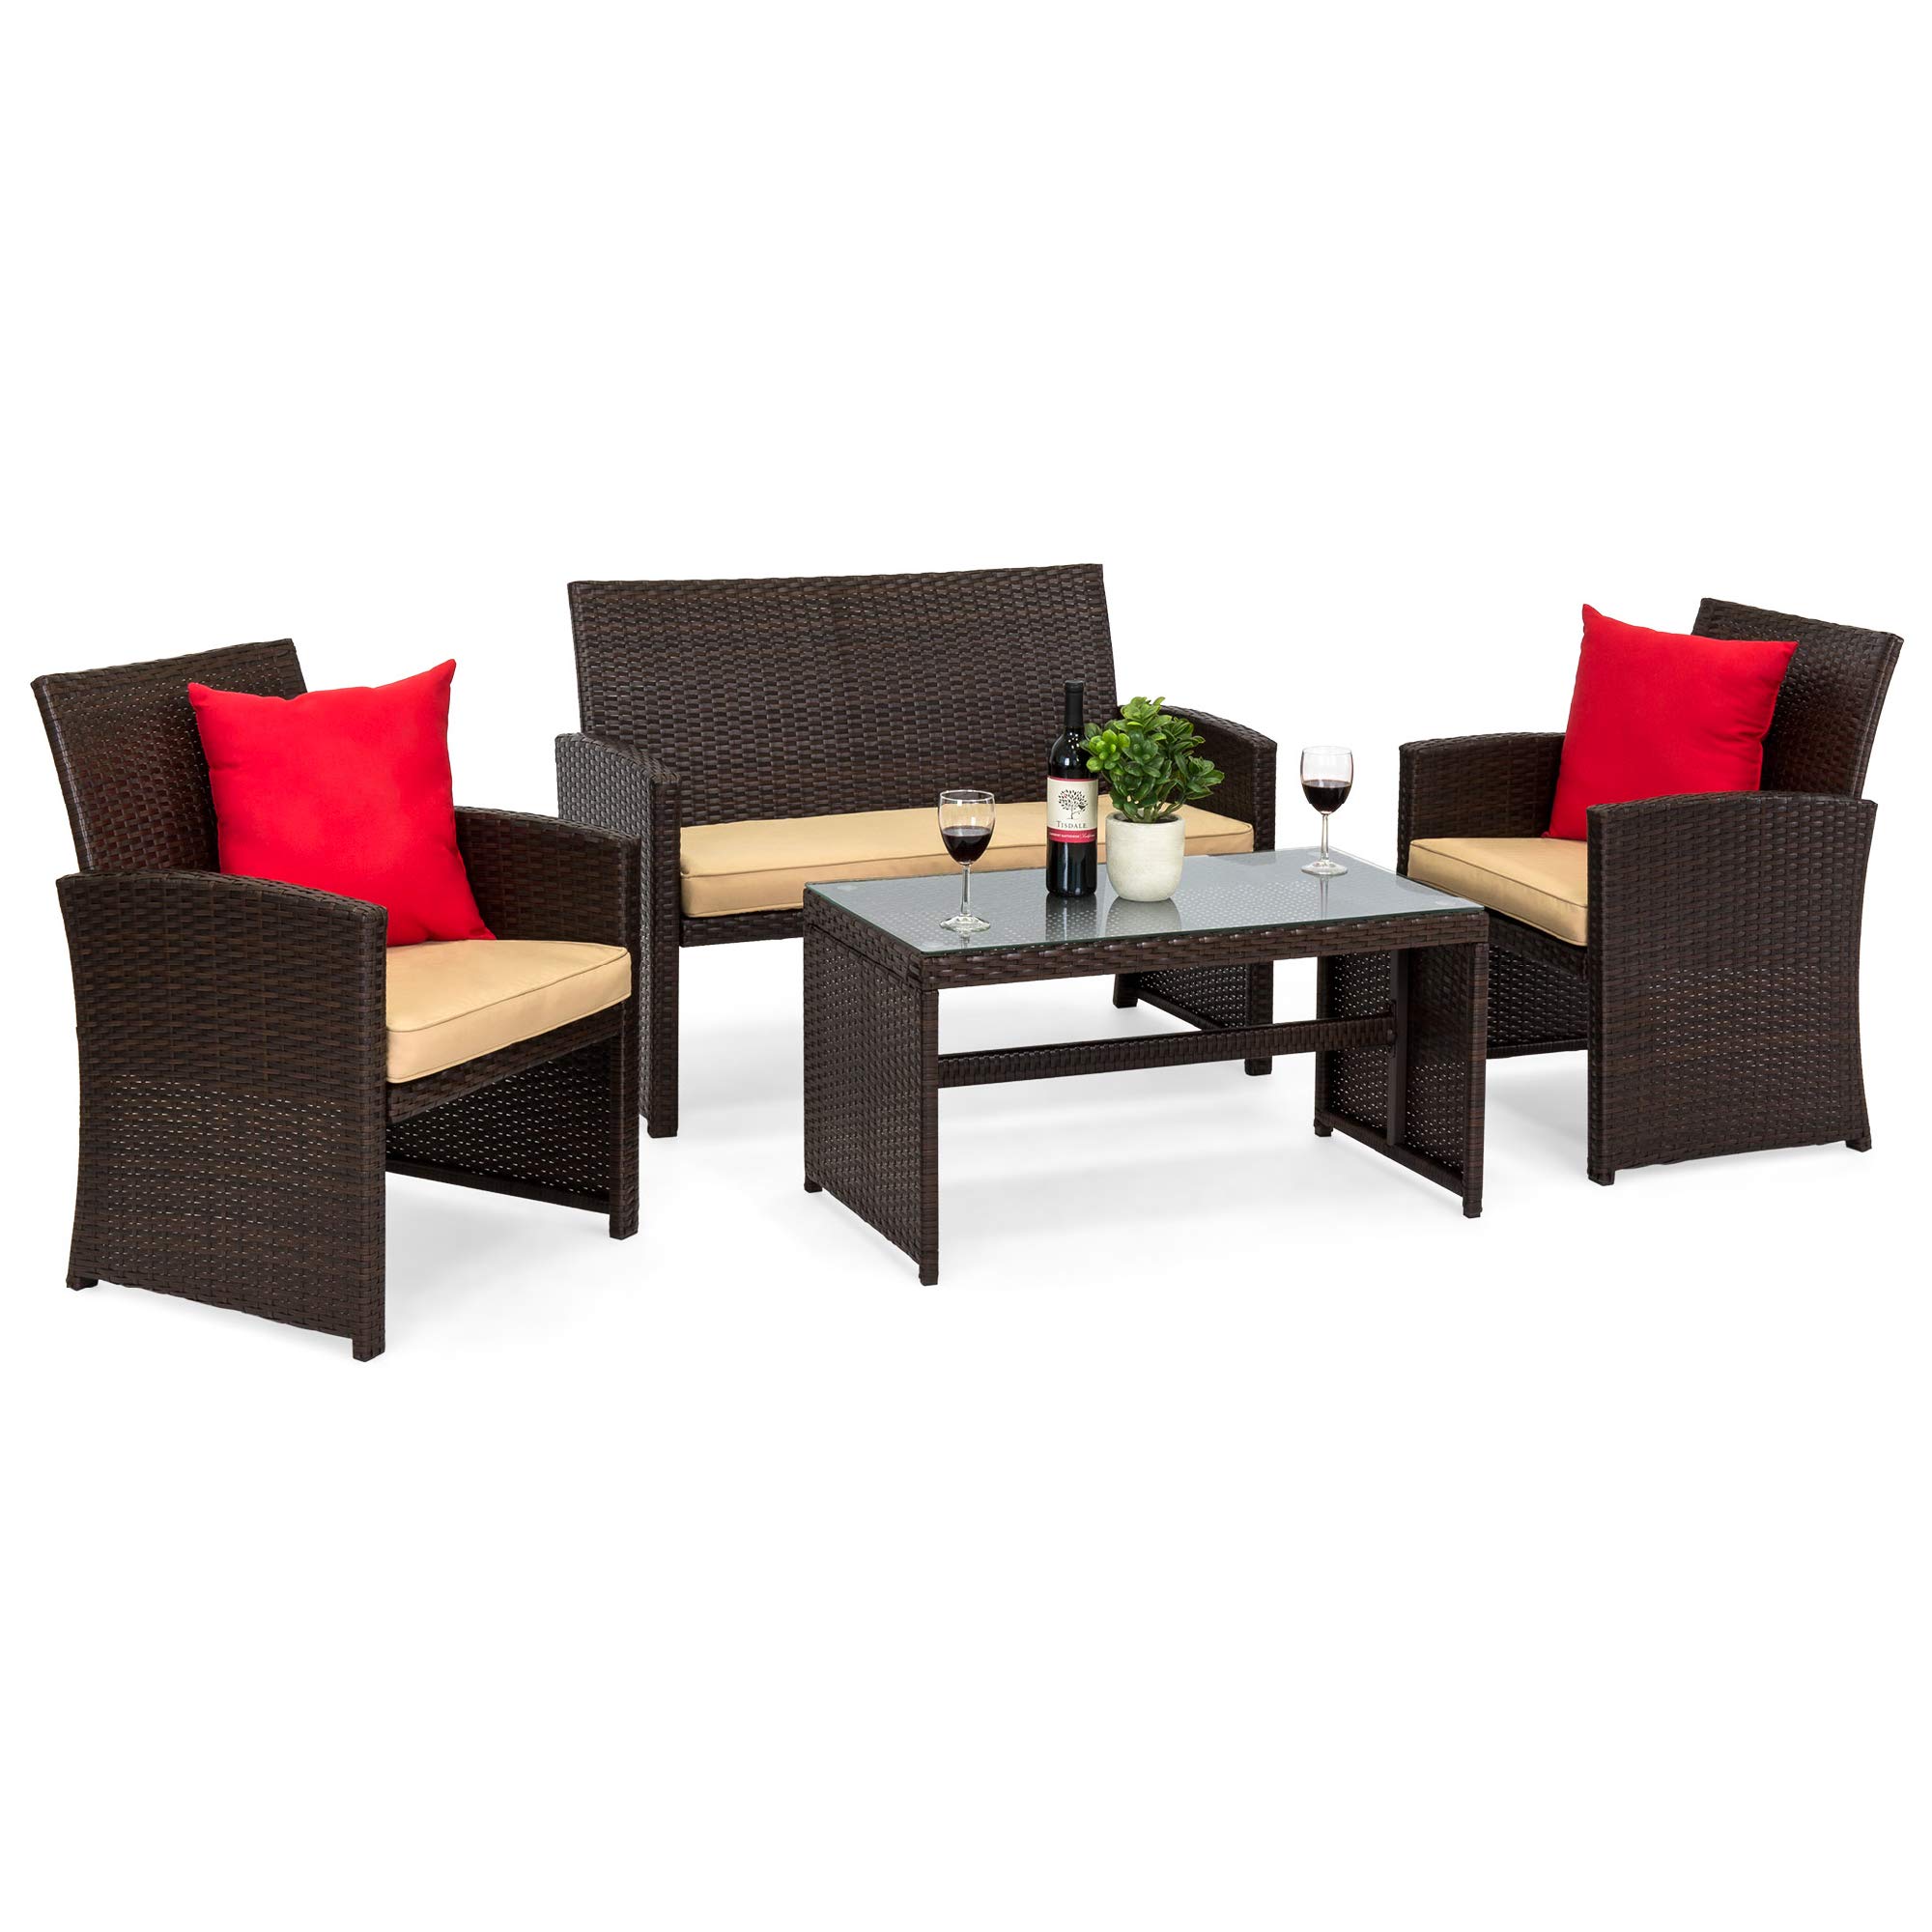 Best Choice Products 4-Piece Outdoor Wicker Patio Conversation Furniture Set for Backyard, Deck, Poolside w/Coffee Table, Seat Cushions - Brown Wicker/Beige Cushions